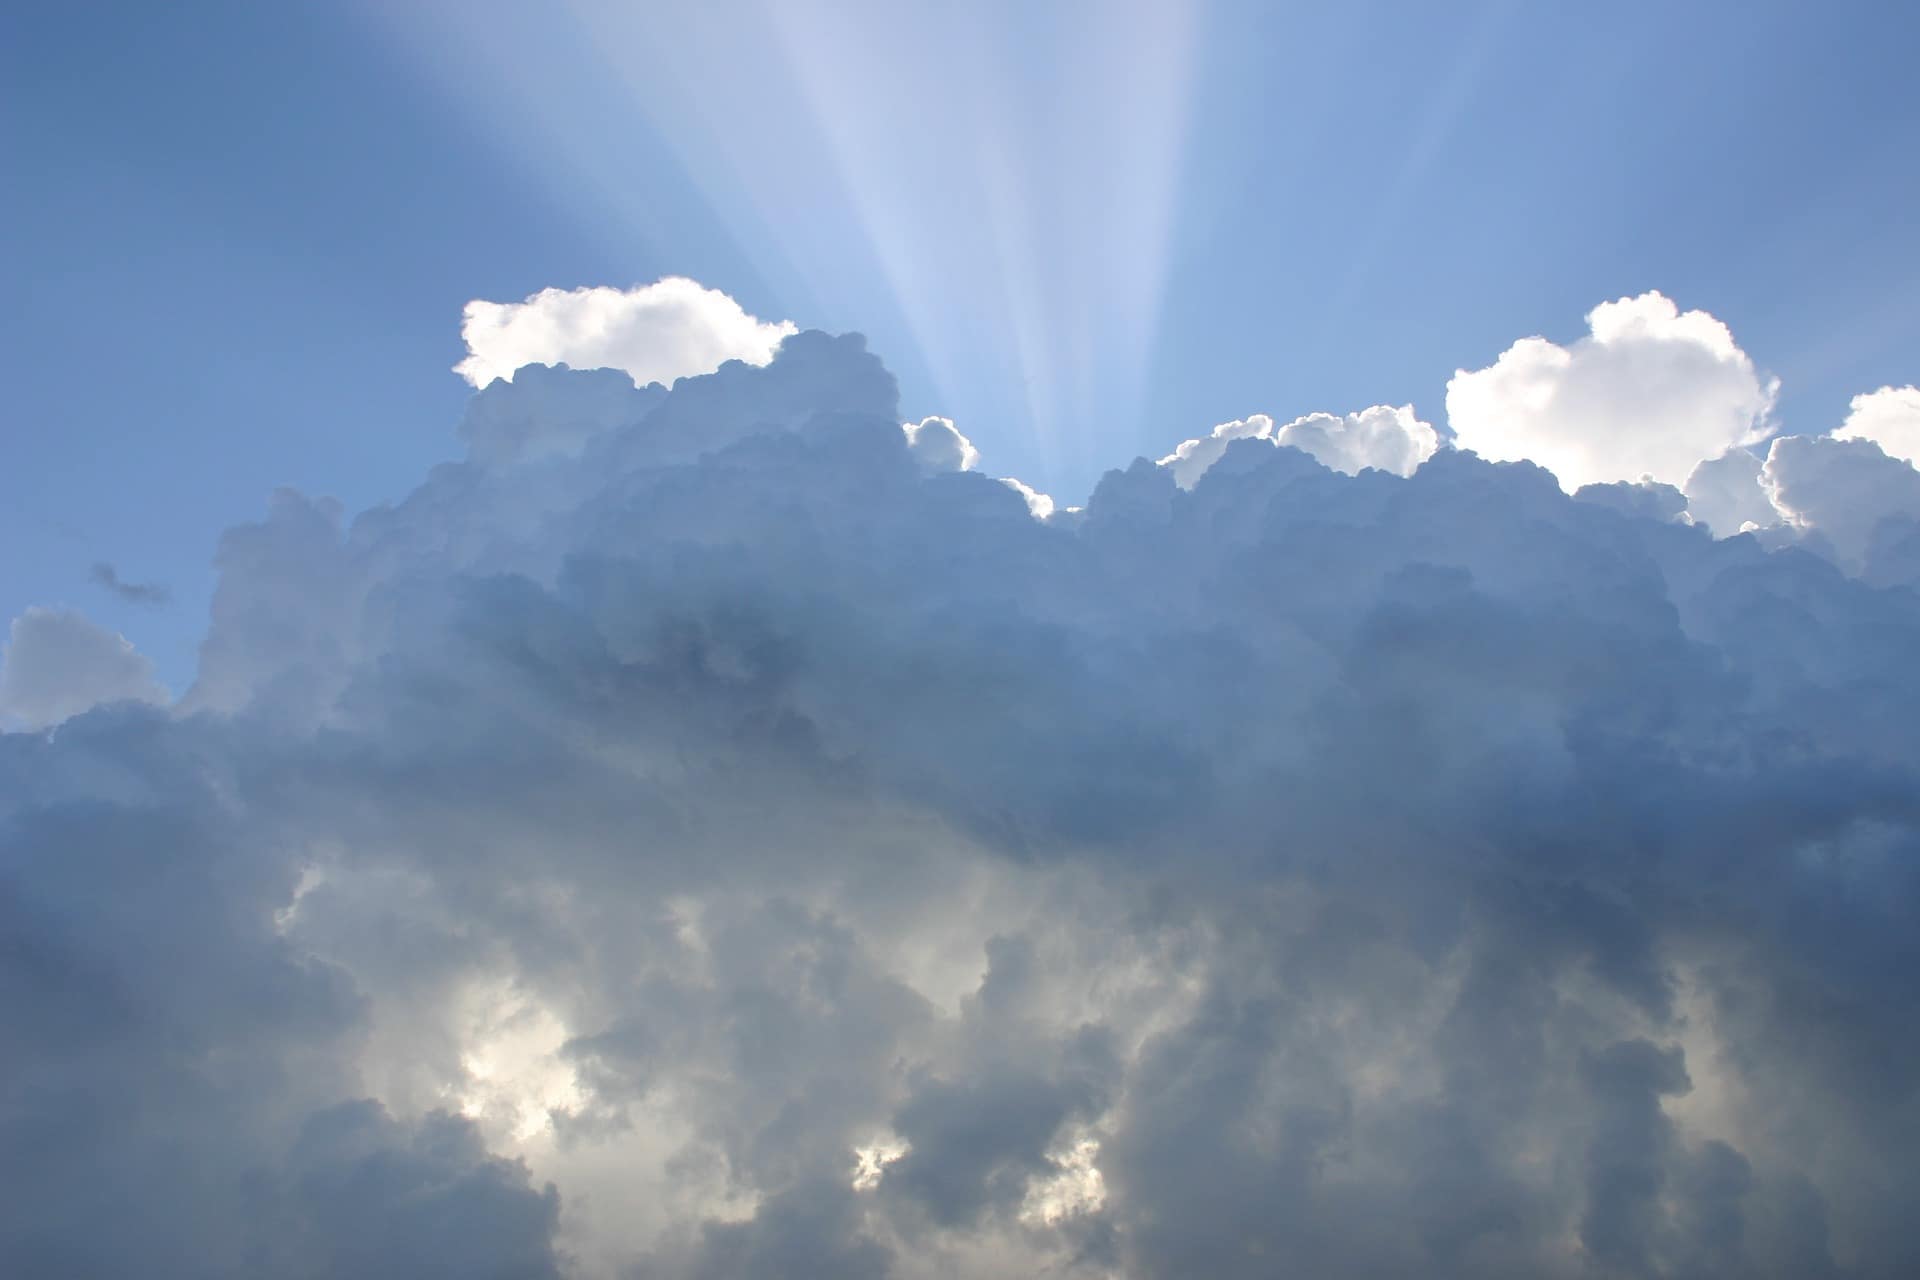 Clouds blocking the sun can reduce your panel production